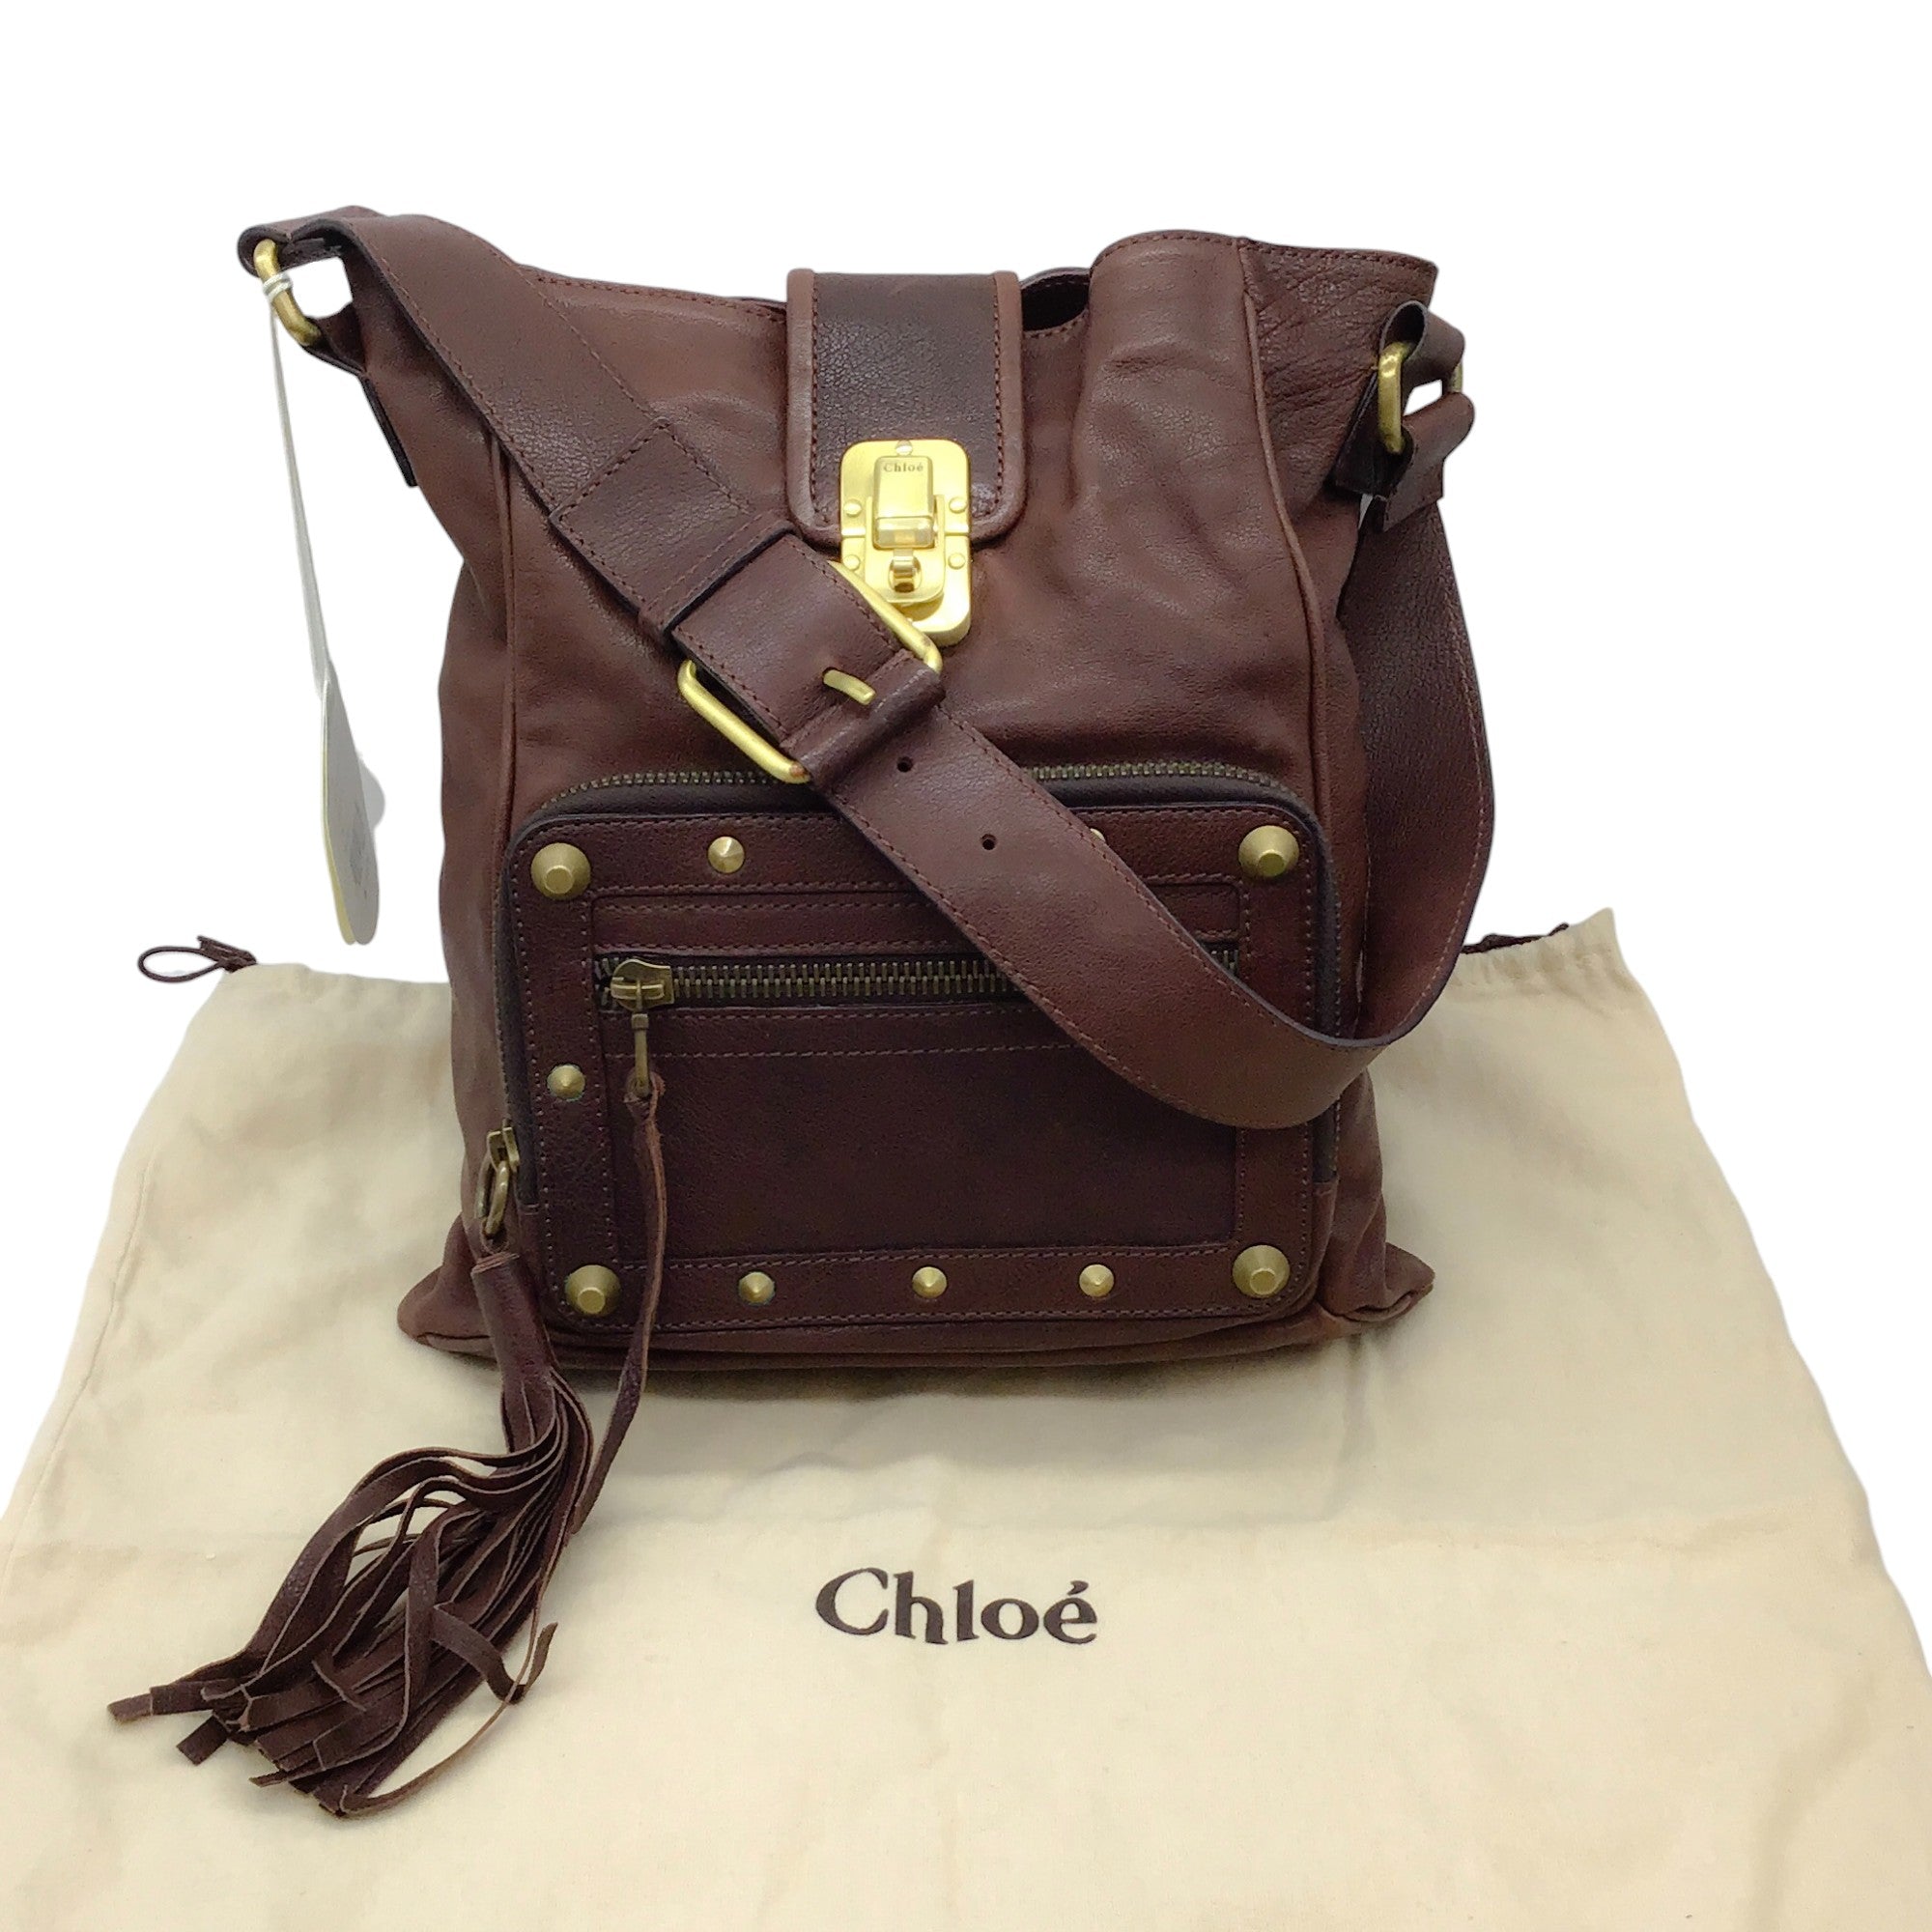 Chloe Chocolate Leather Shoulder Bag with Gold Studs